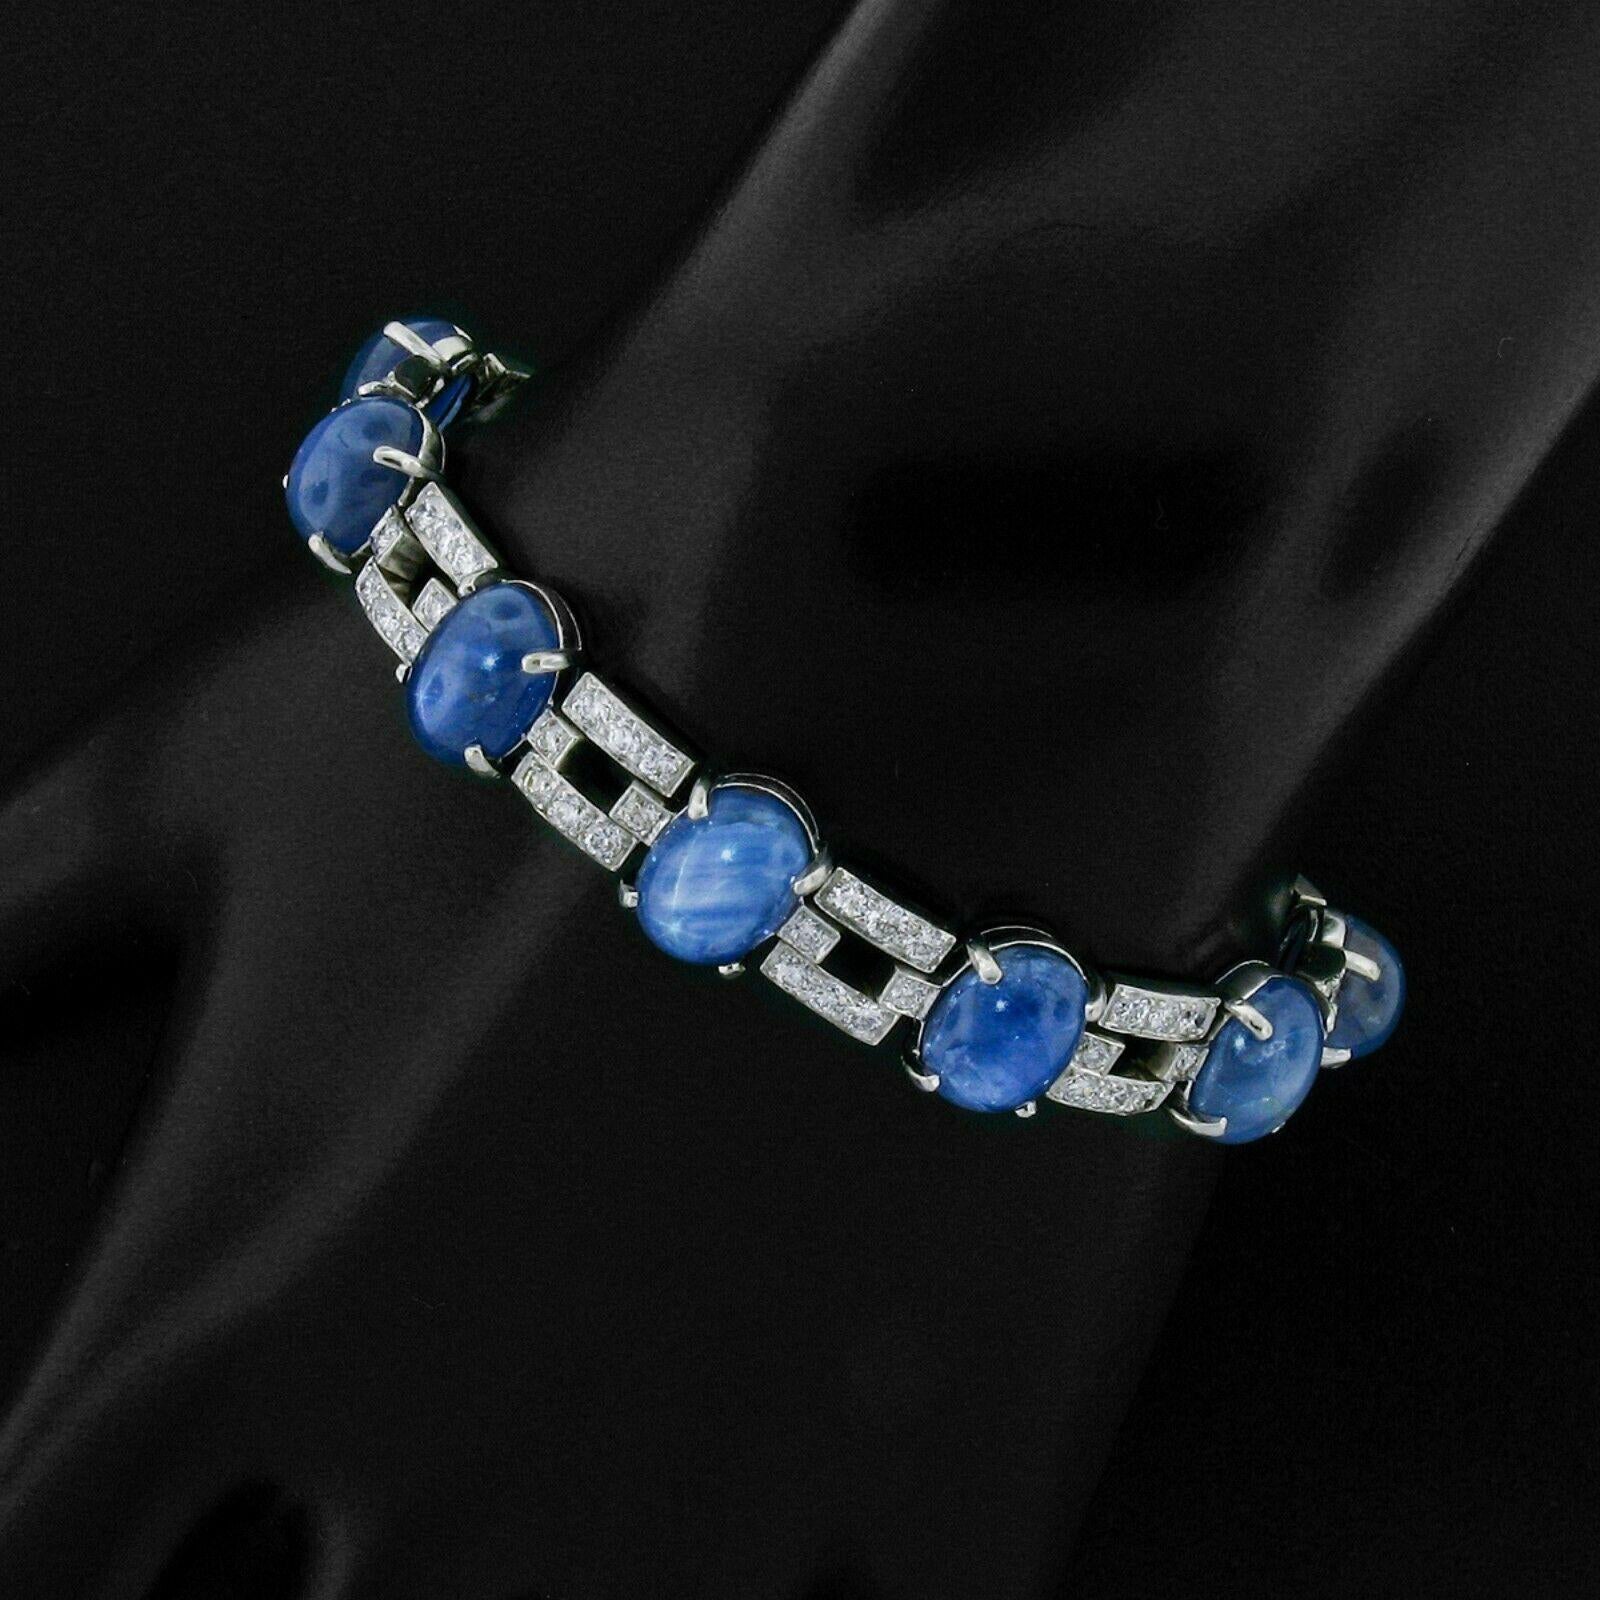 This magnificent piece was hand crafted in solid platinum and is set with the finest quality diamonds and star sapphires throughout. The bracelet features alternating diamond drenched lines and 4-prong set sapphires links. Its gems were hand picked